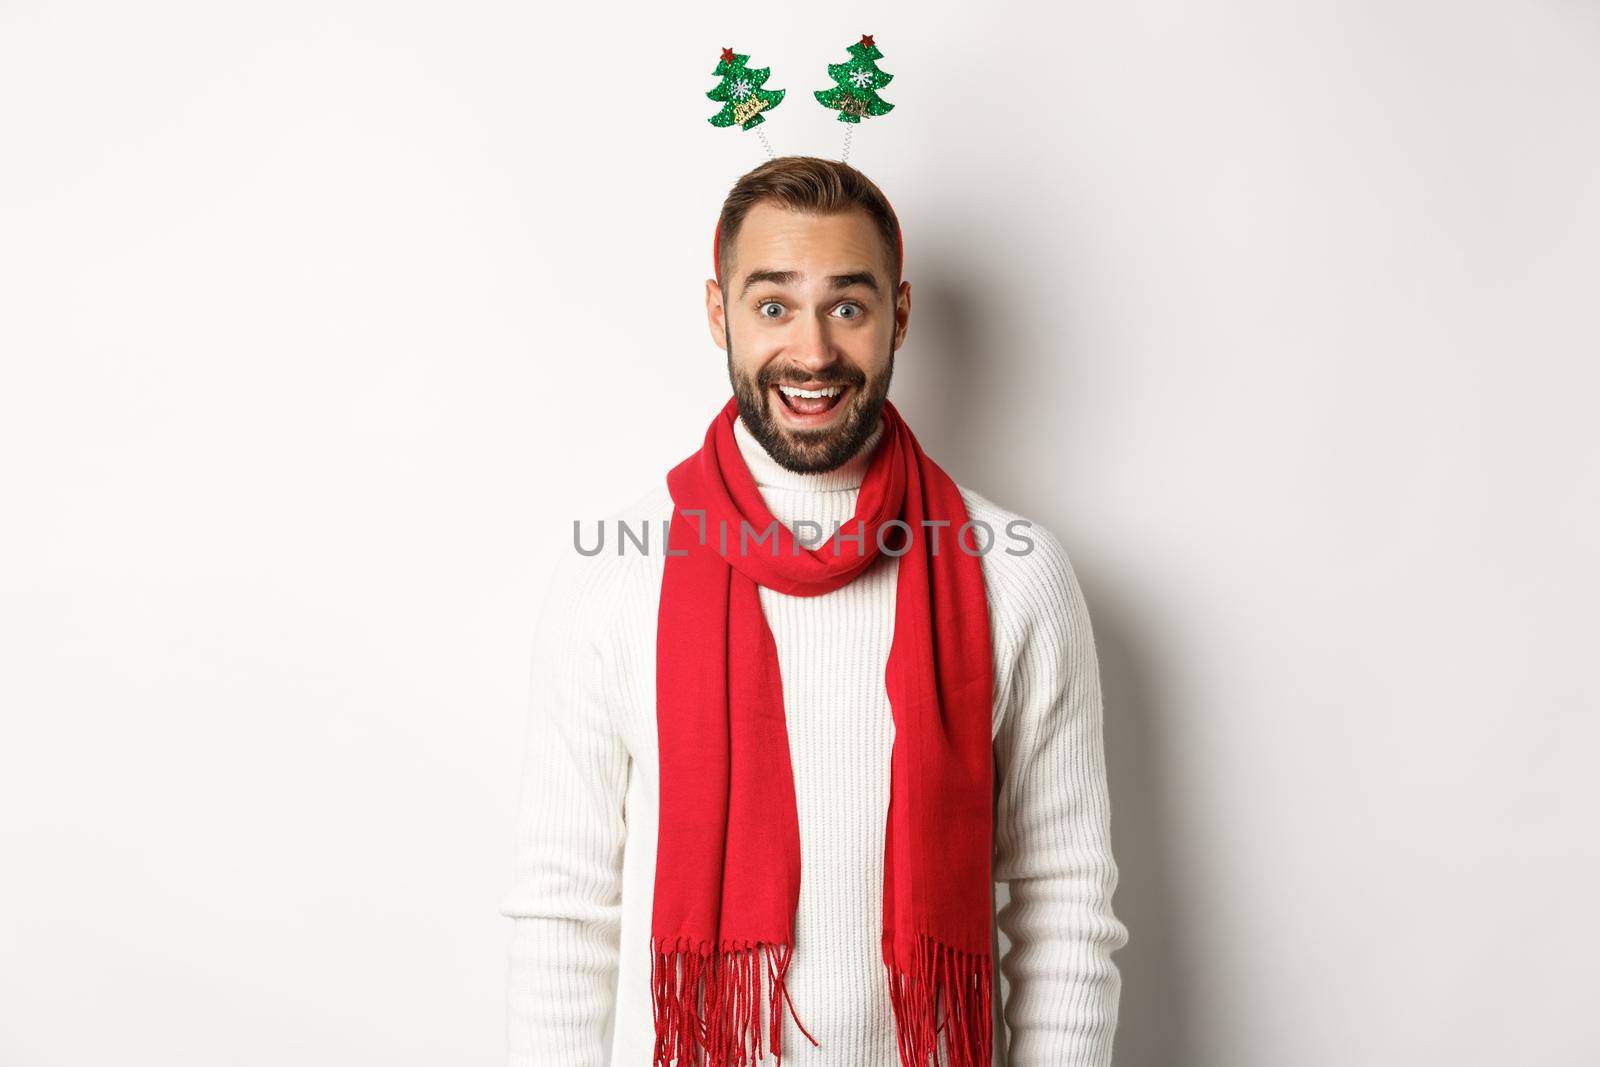 Christmas party and celebration concept. Happy bearded man looking surprised, wearing funny accessory hat, standing against white background.